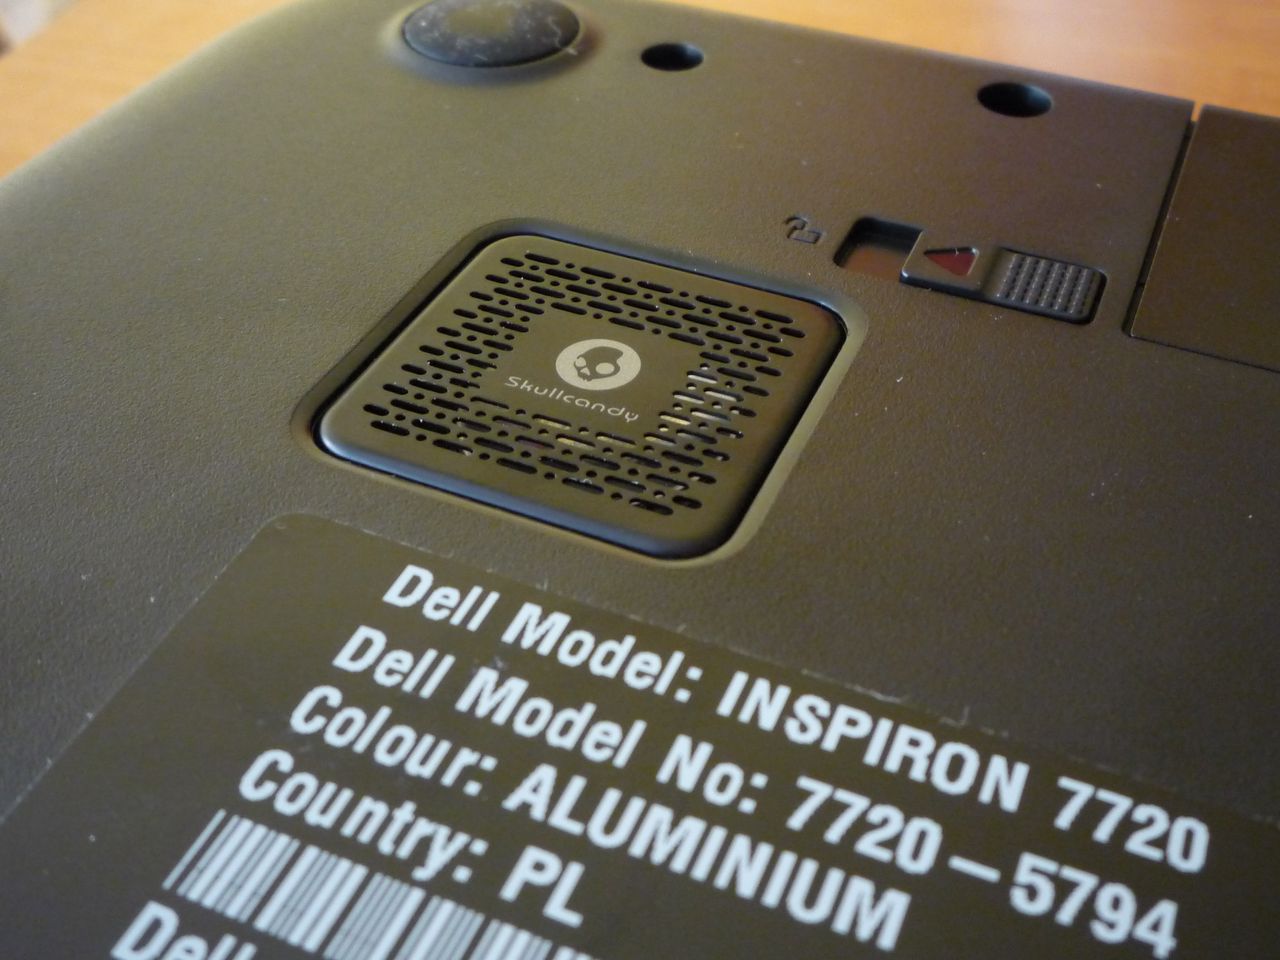 Dell Inspiron 17R Special Edition (7720) - jest i subwoofer